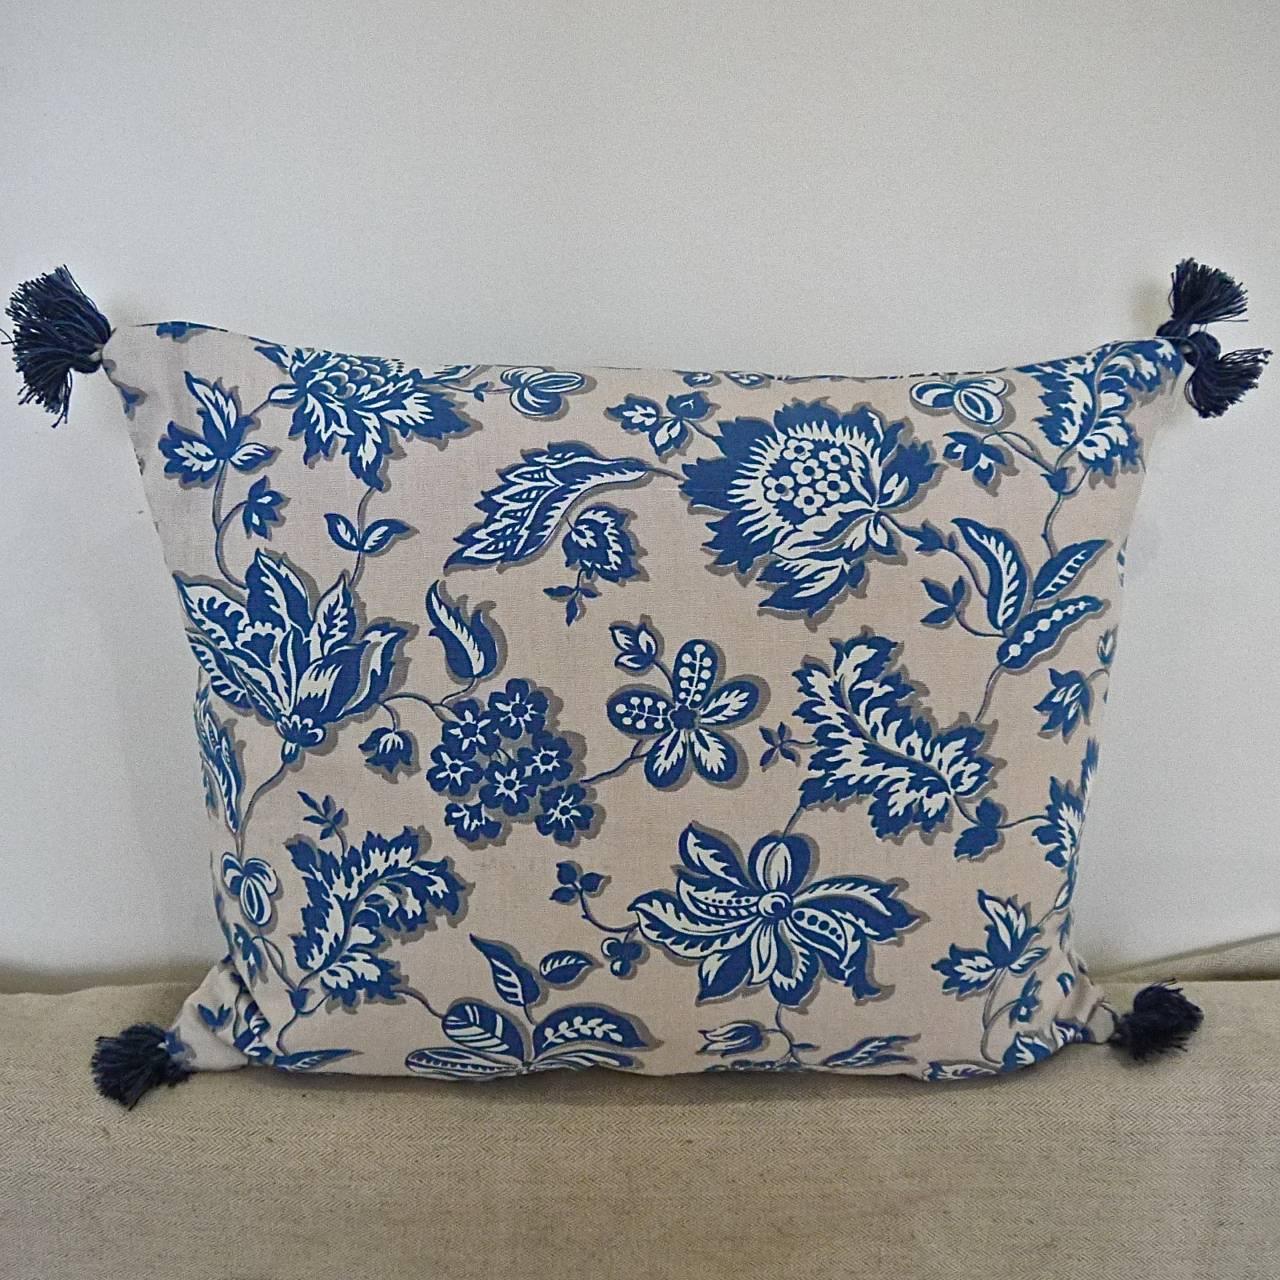 French cotton cushion printed with stylized fresh blue and white flowers and leaves on a soft off-white ground, circa 1930-1940s. Backed in the same design with vintage French blue cotton tassels on each corner. Slip-stitched closed with a duck